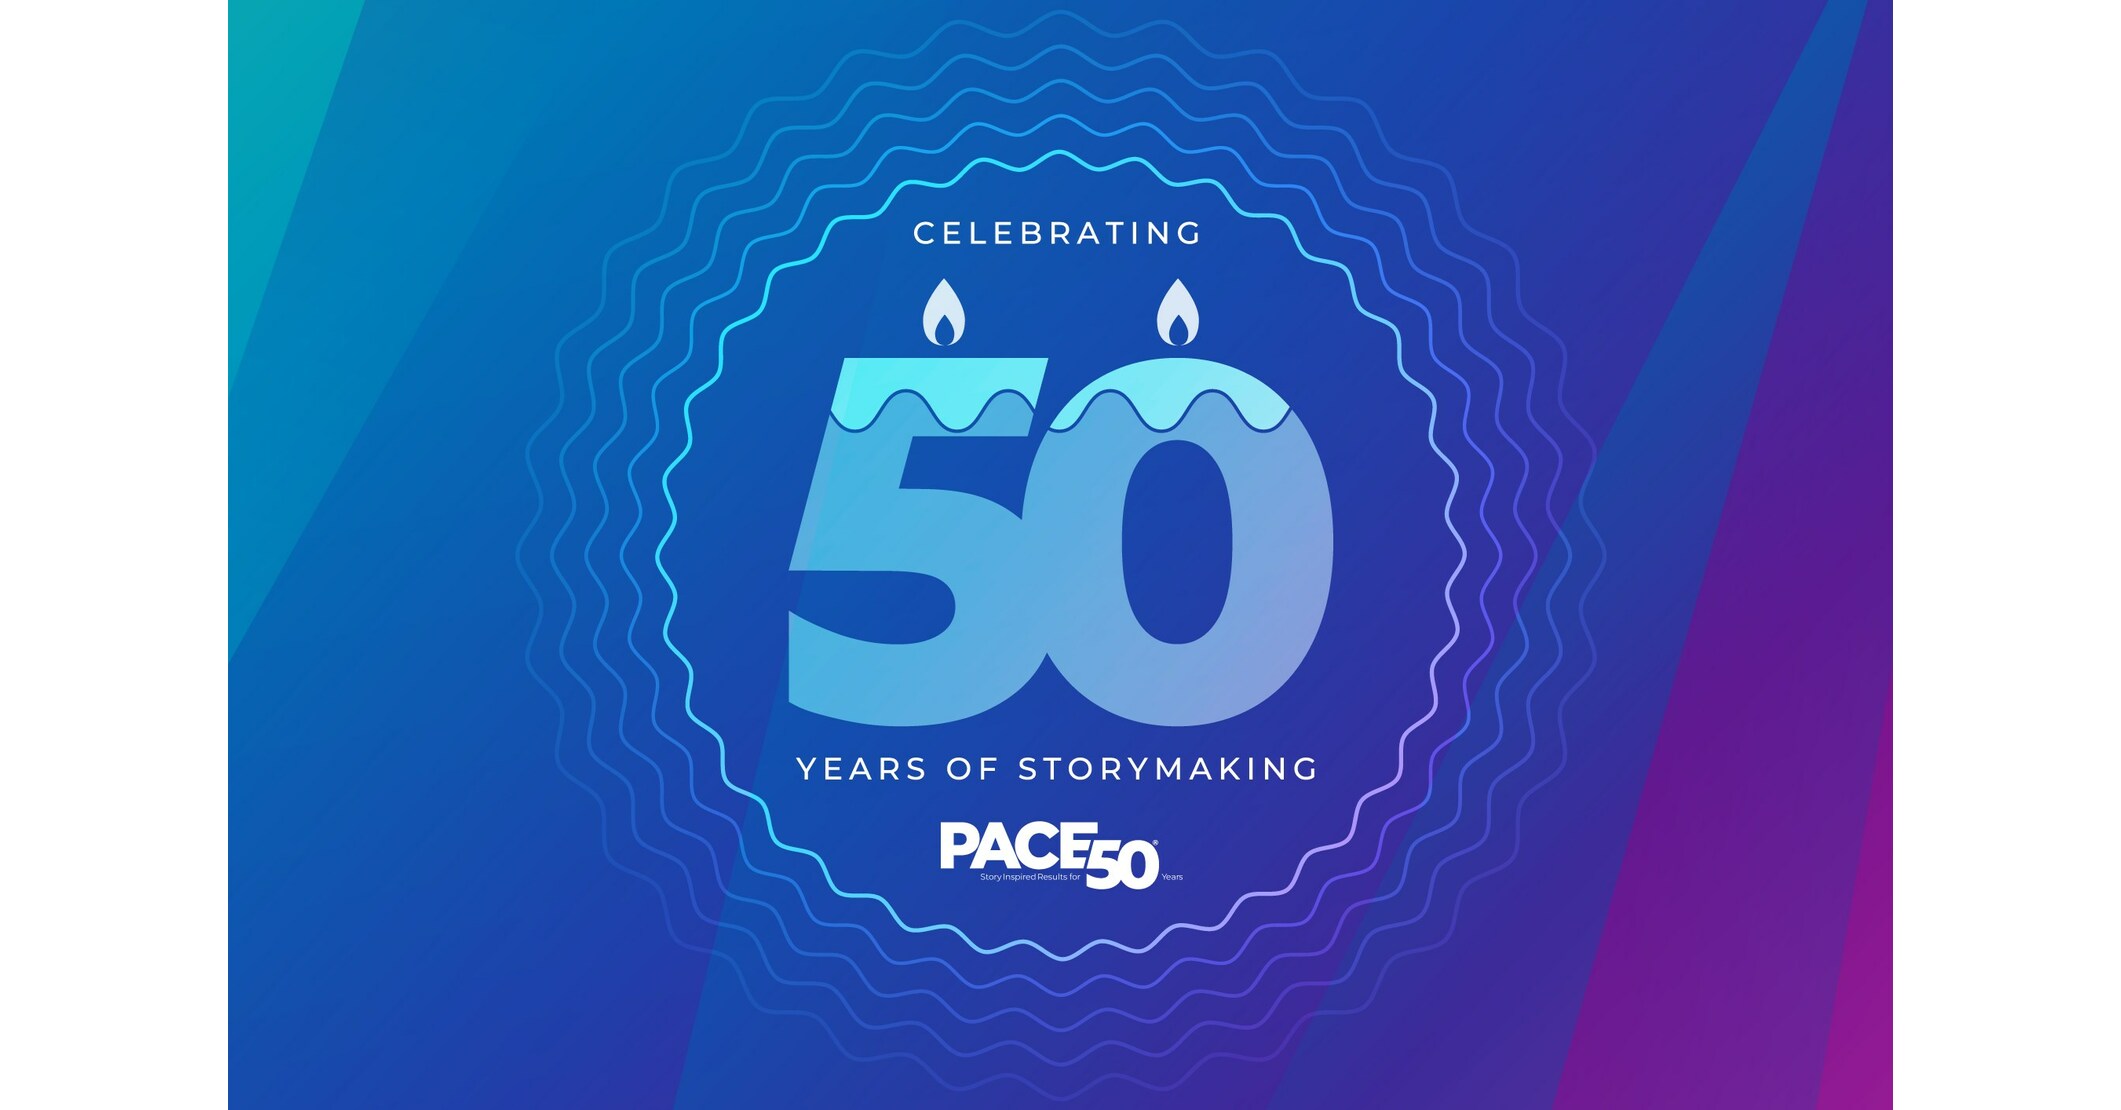 Pace, Nationally Ranked Independent Marketing Agency, Turns 50 Years Old